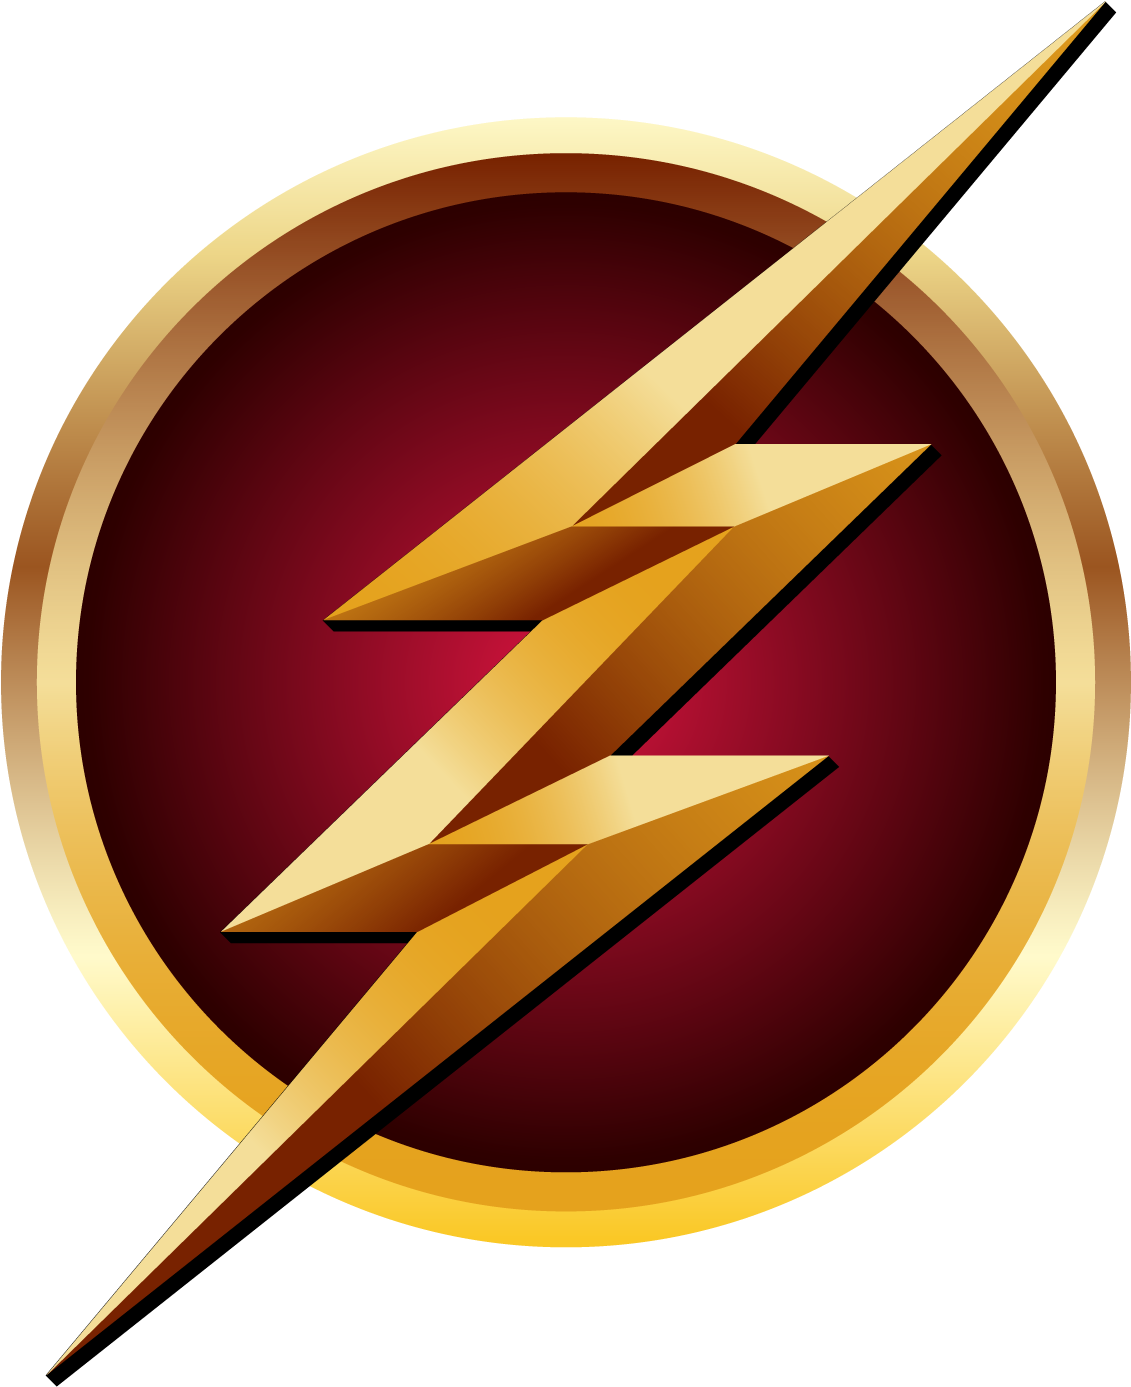 A Gold Lightning Bolt In A Red Circle